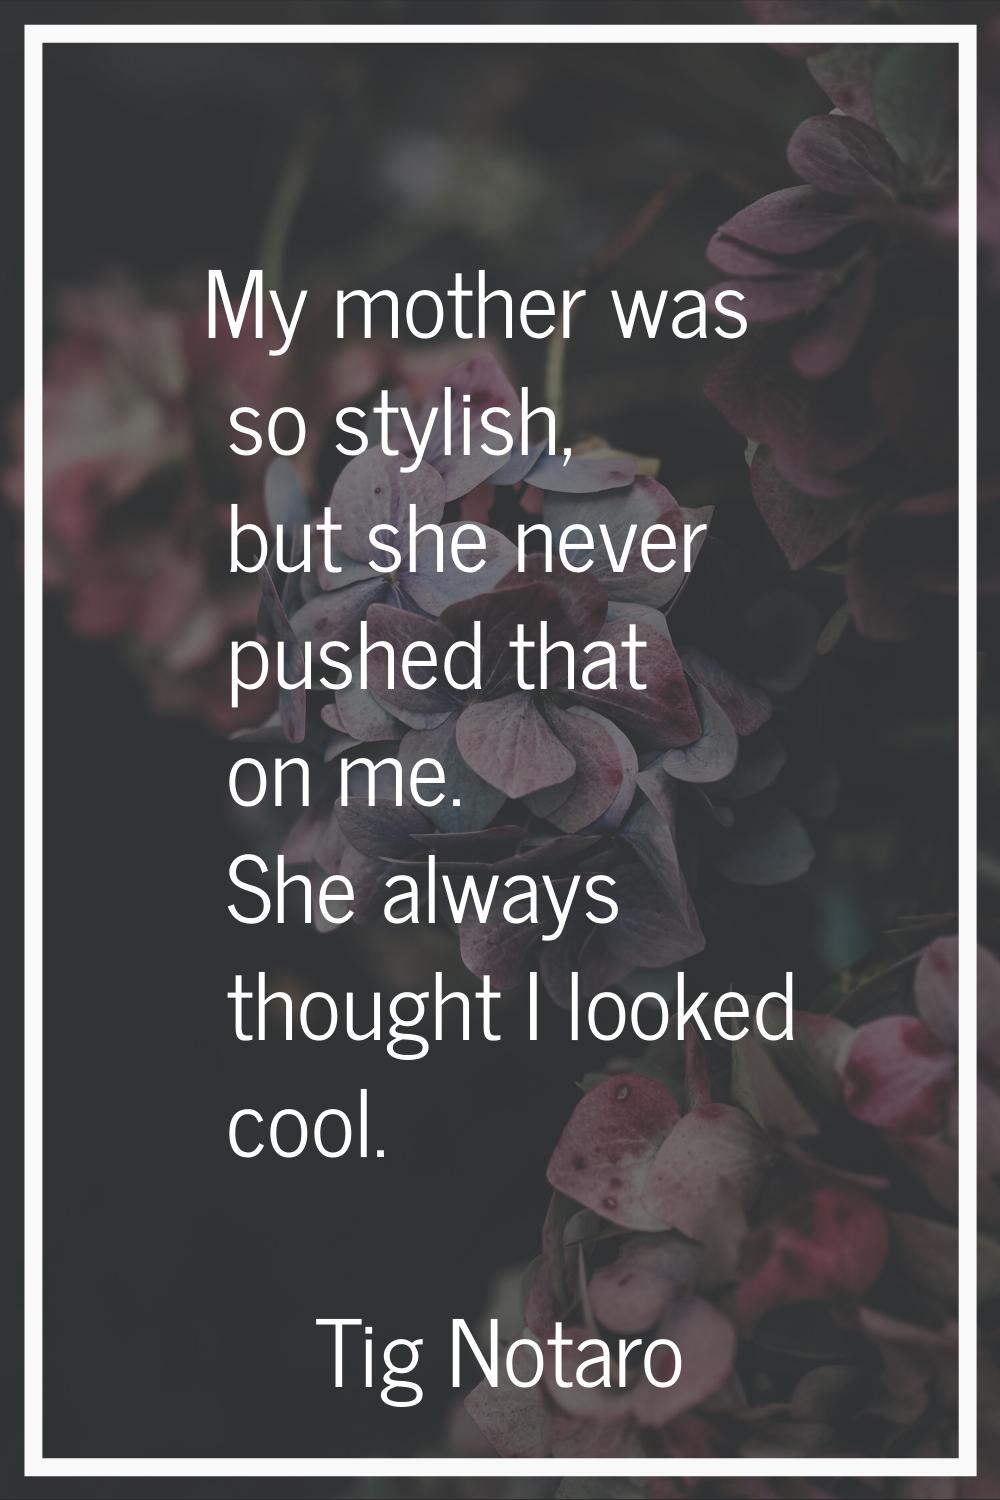 My mother was so stylish, but she never pushed that on me. She always thought I looked cool.